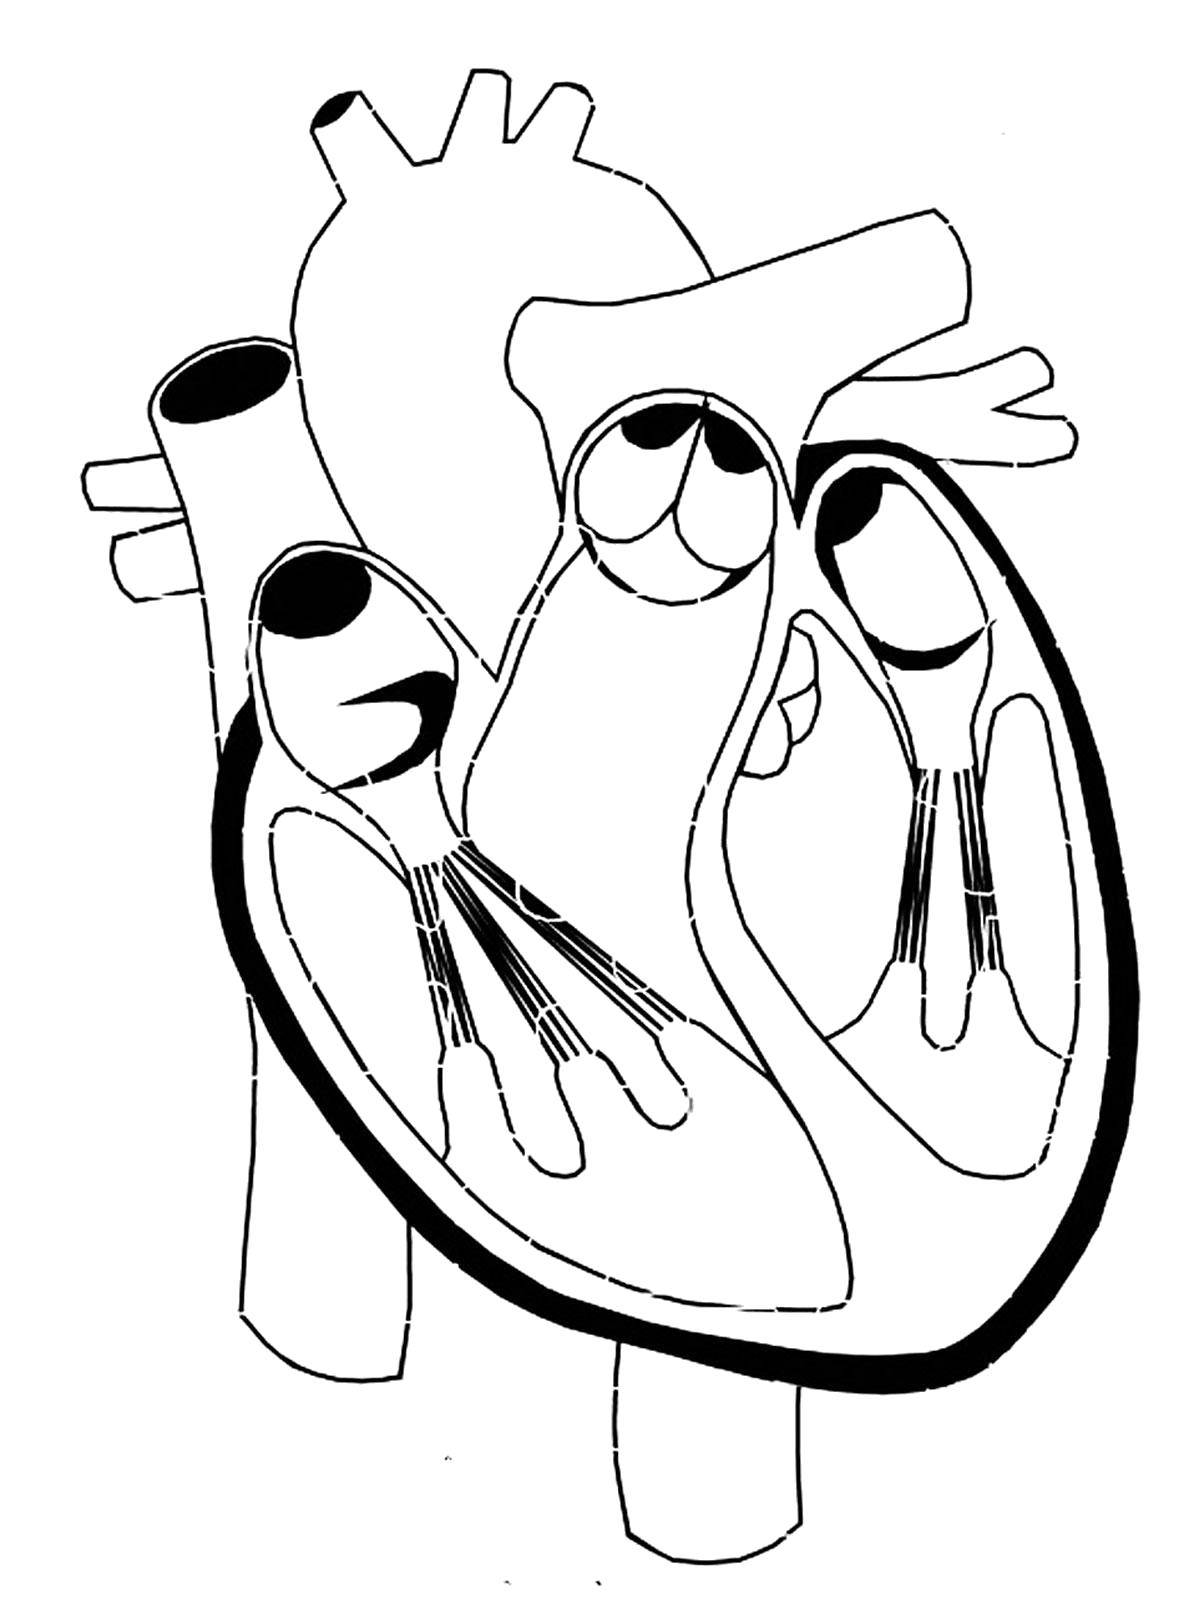 Coloring Heart. Category The structure of the body. Tags:  Body, heart.